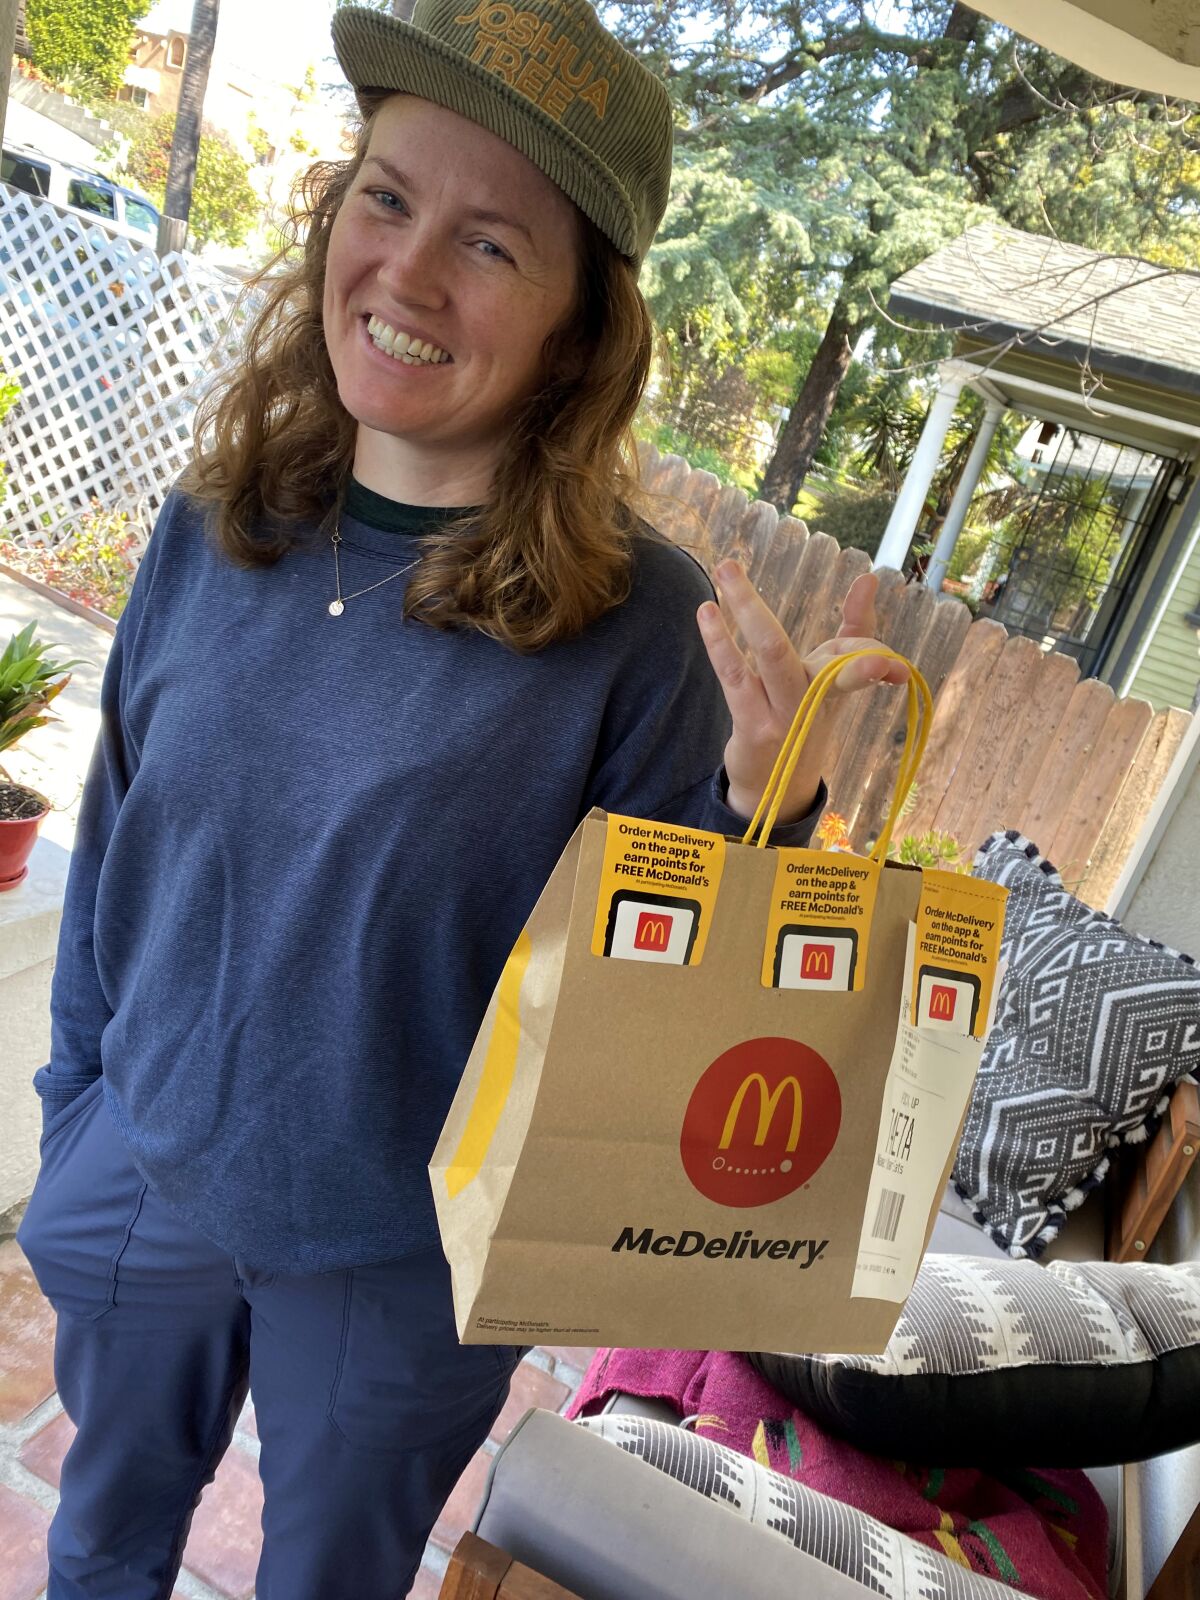 A woman holds a bag of McDonald's food